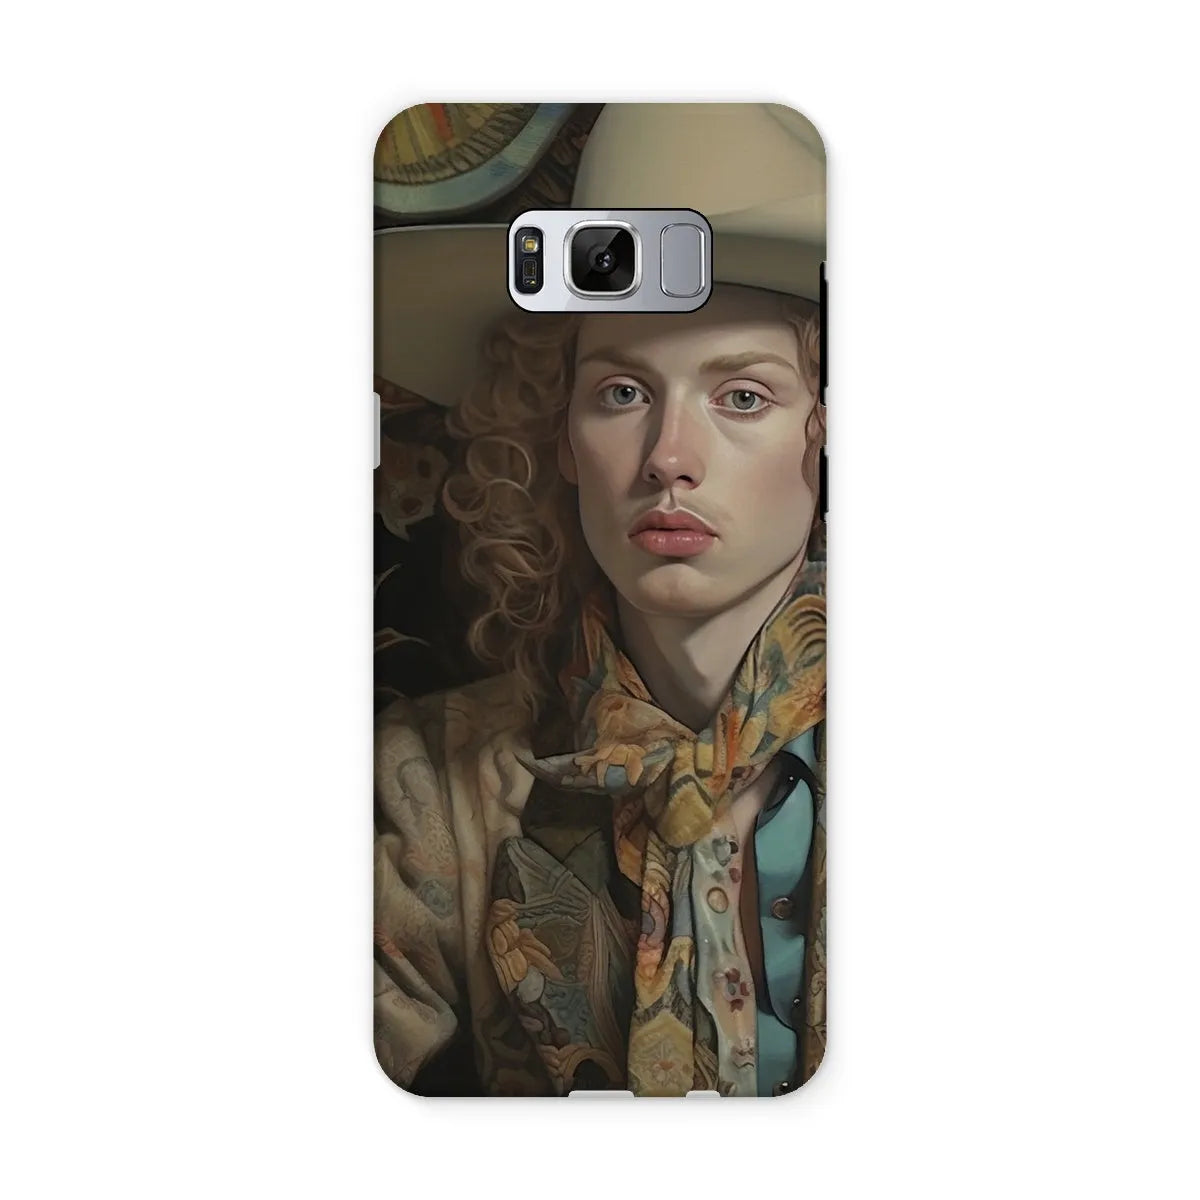 Ollie The Transgender Cowboy - F2m Dandy Outlaw Phone Case - Samsung Galaxy S8 / Matte - Mobile Phone Cases - Aesthetic